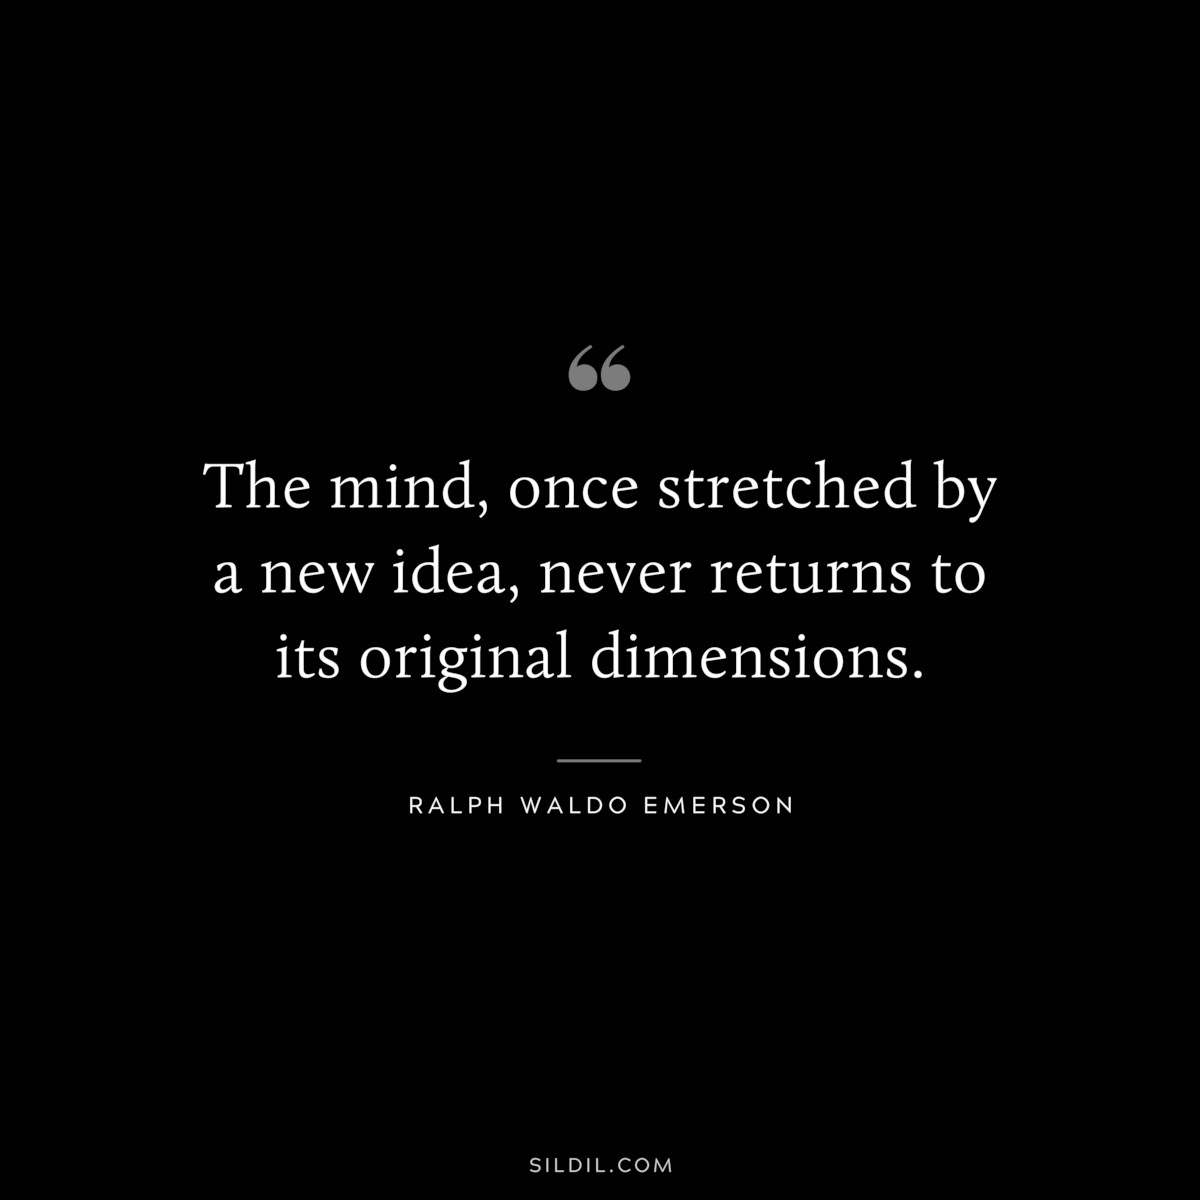 The mind, once stretched by a new idea, never returns to its original dimensions. — Ralph Waldo Emerson